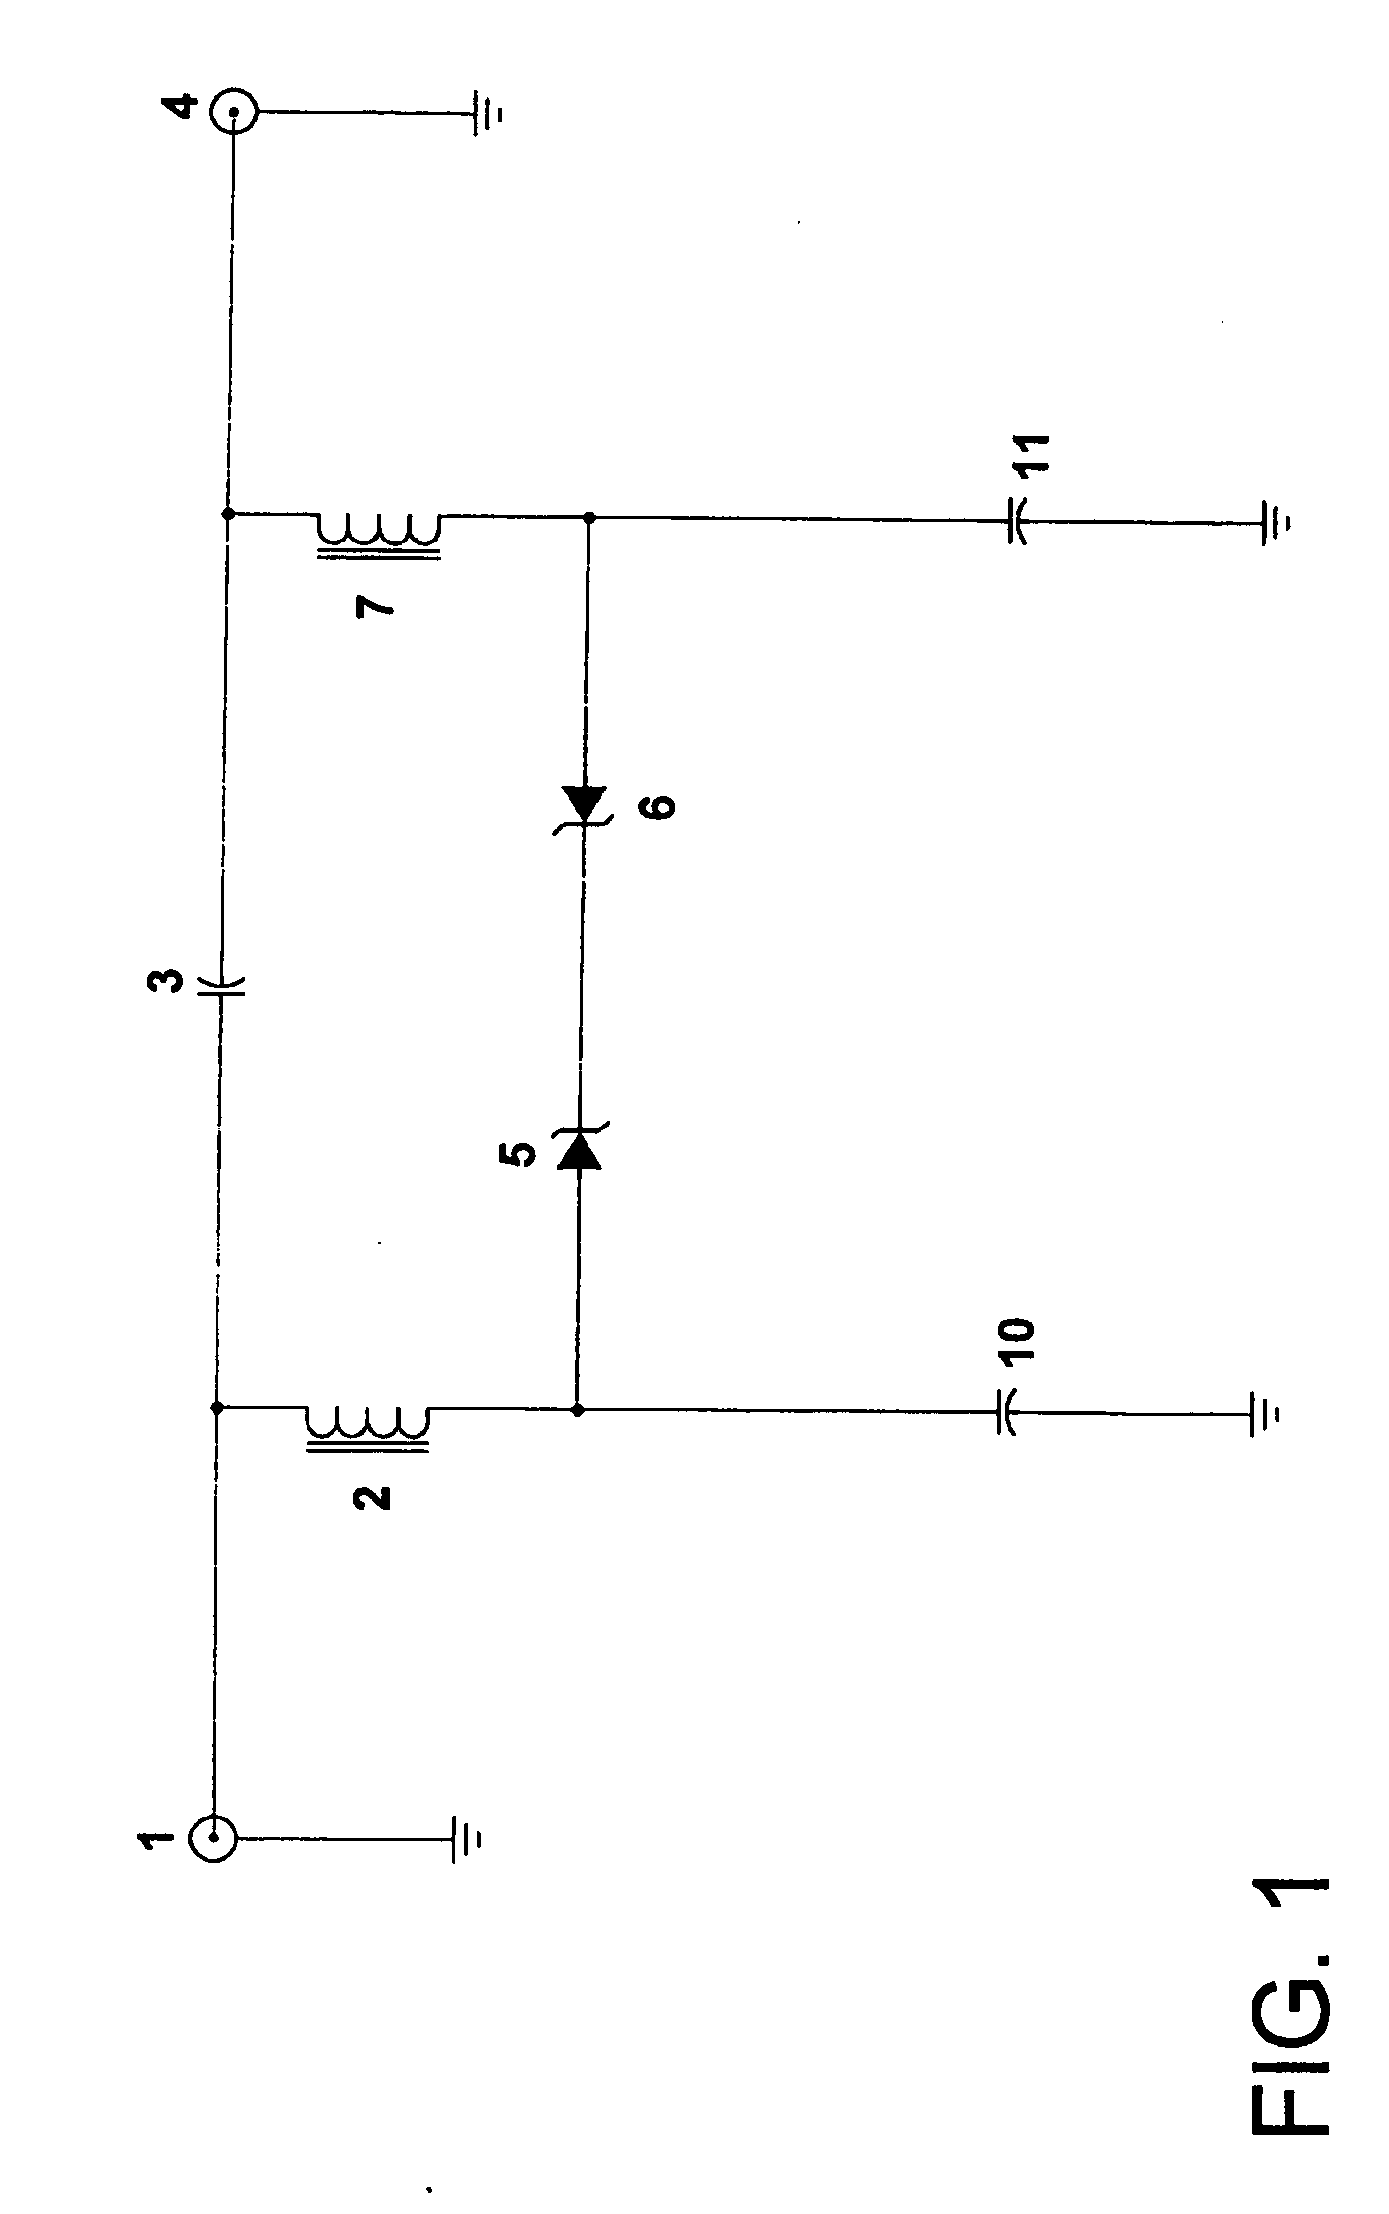 Voltage limiter for coaxial cable carrying RF signals and voltage